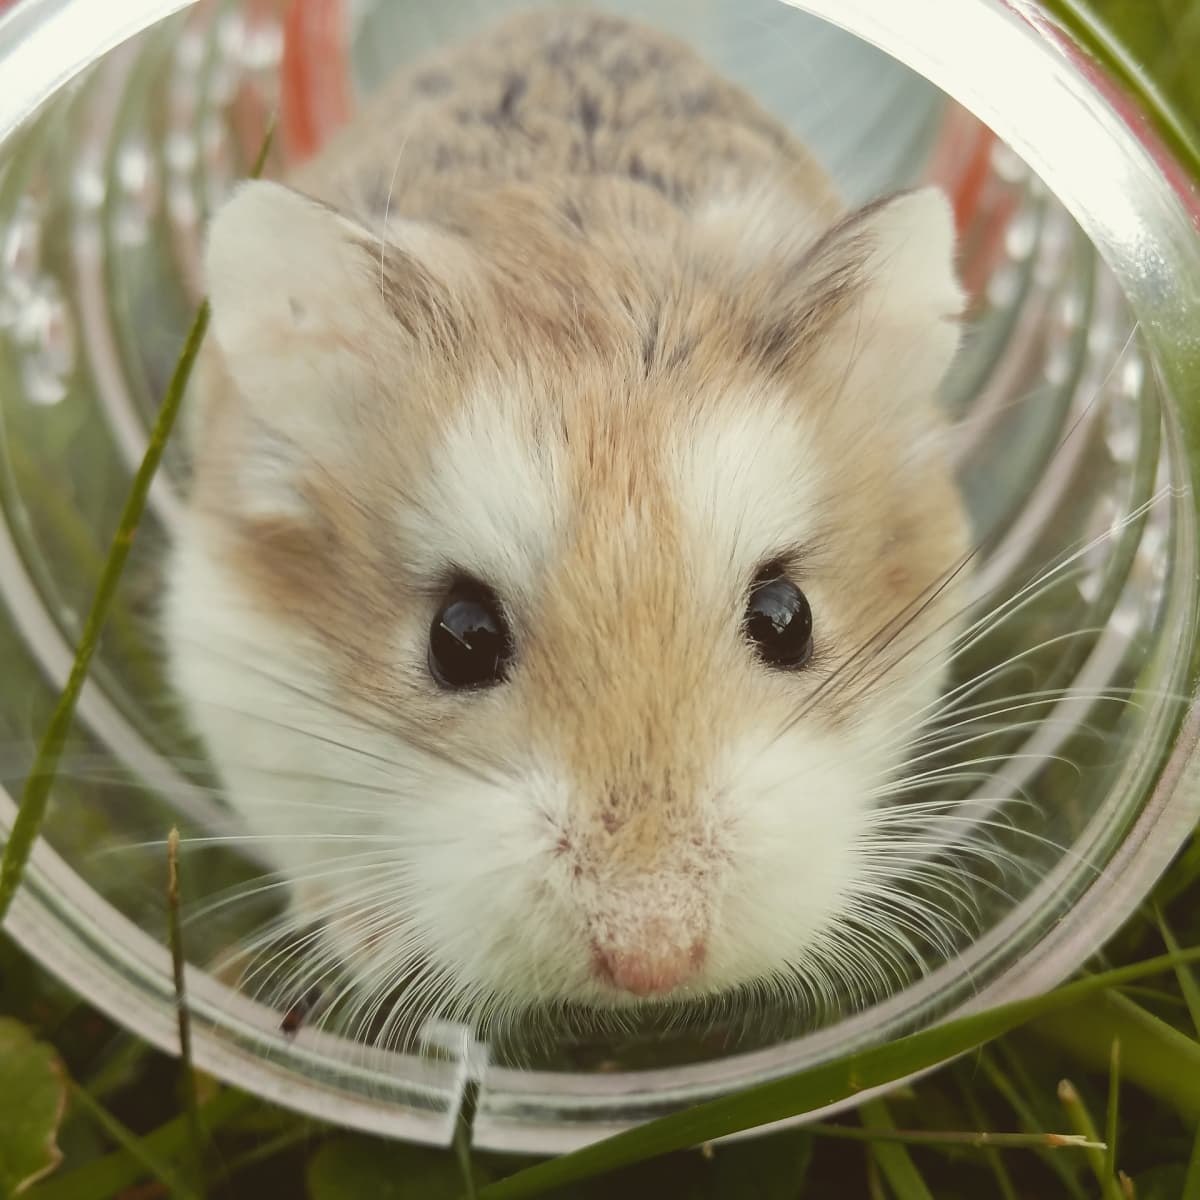 7. Making Sense of your Hamster’s Yawning and Grooming